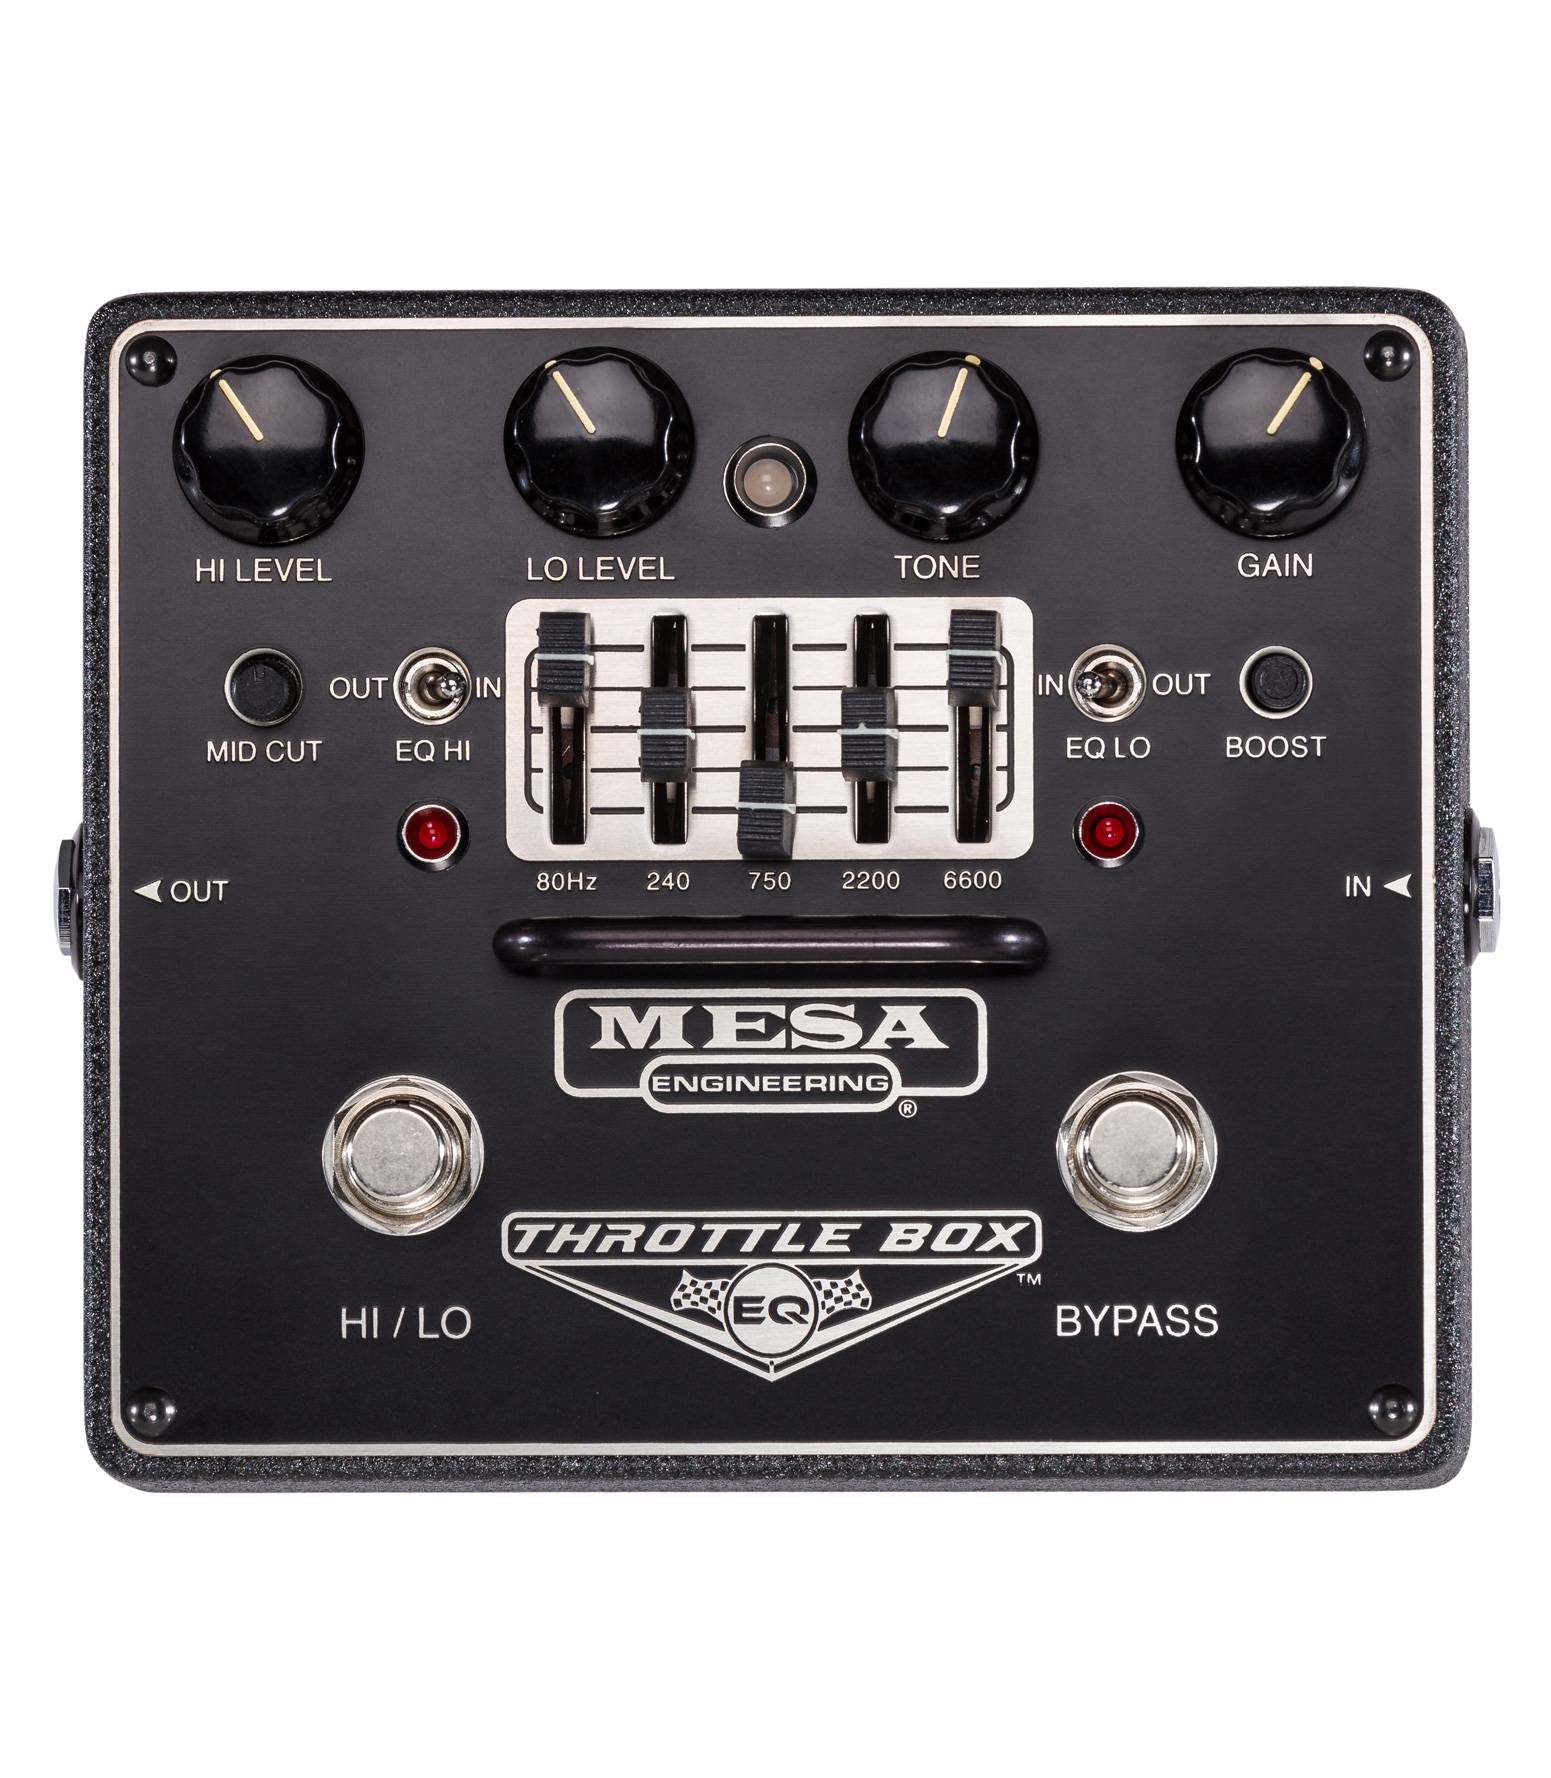 Mesaboogie - Throttle Box EQ 5 band Graphic Pedal